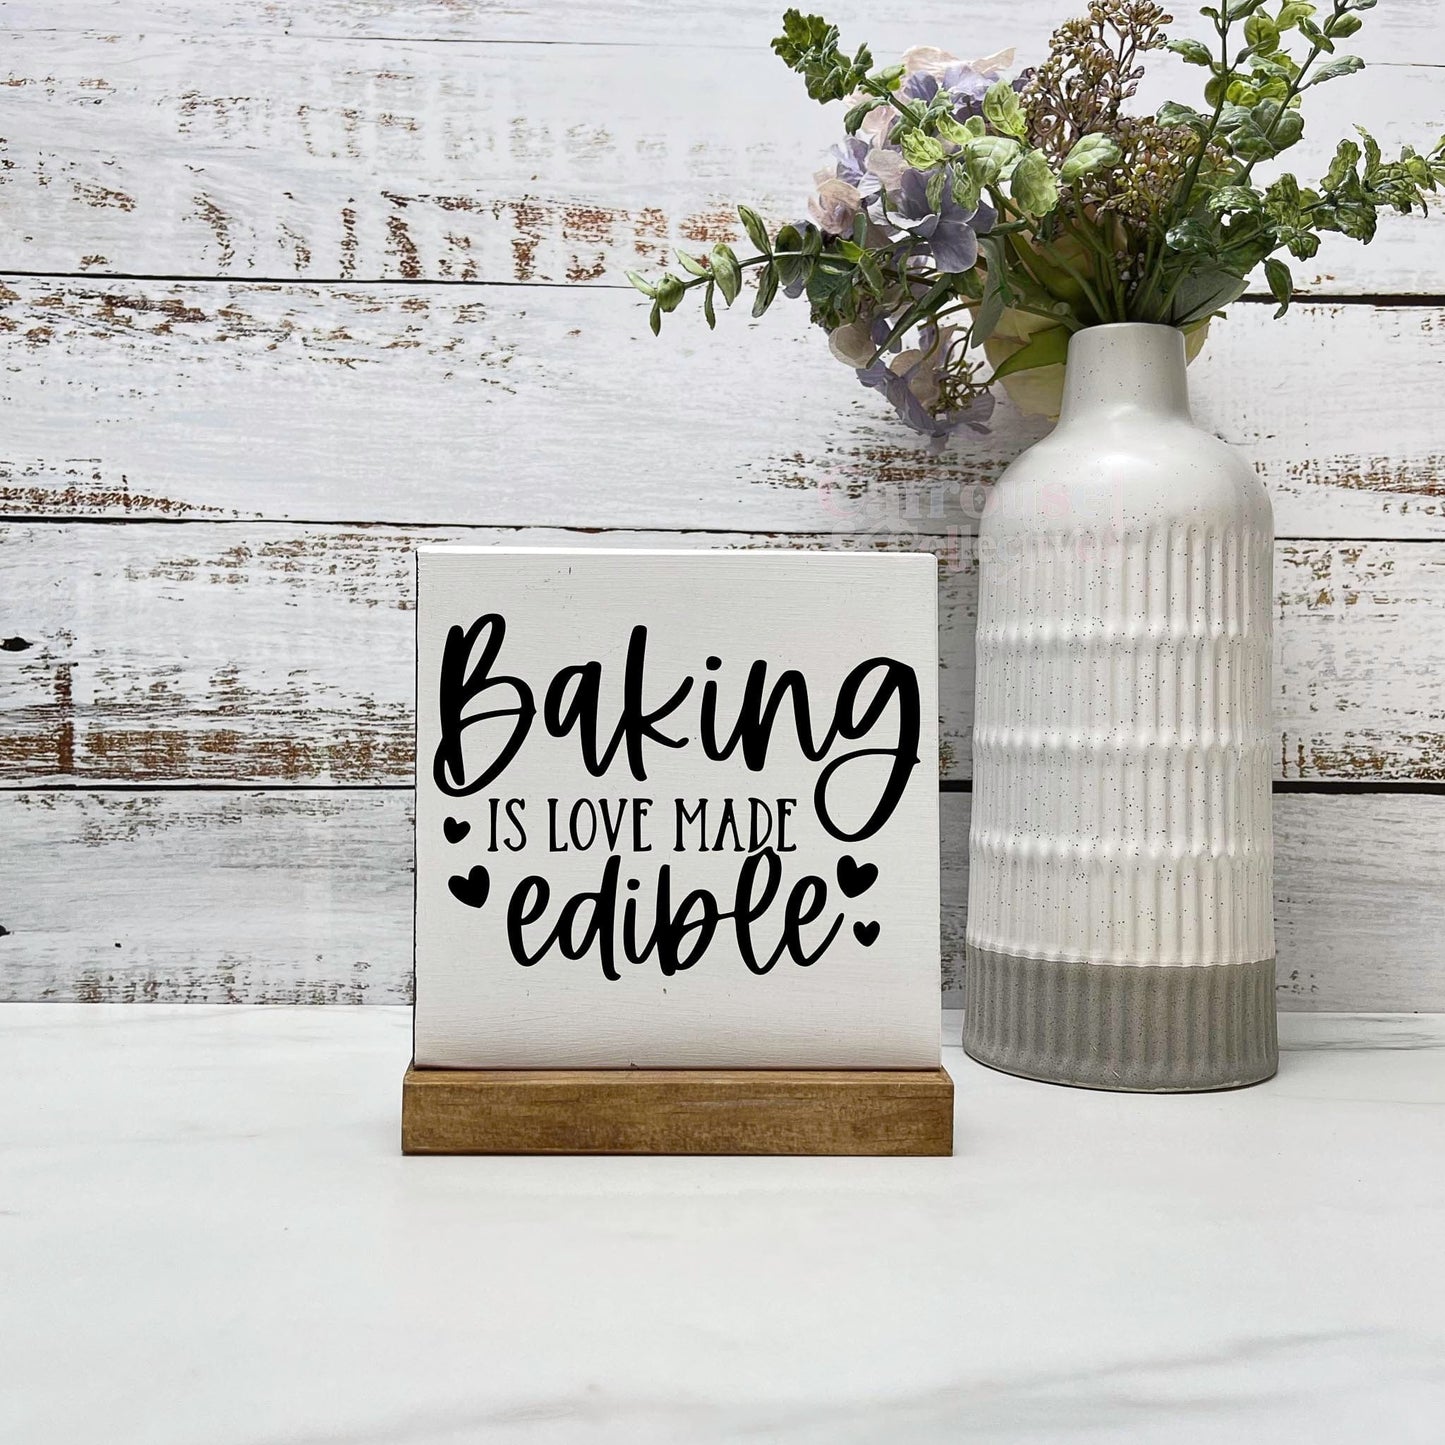 Baking is love made edible sign, kitchen wood sign, kitchen decor, home decor